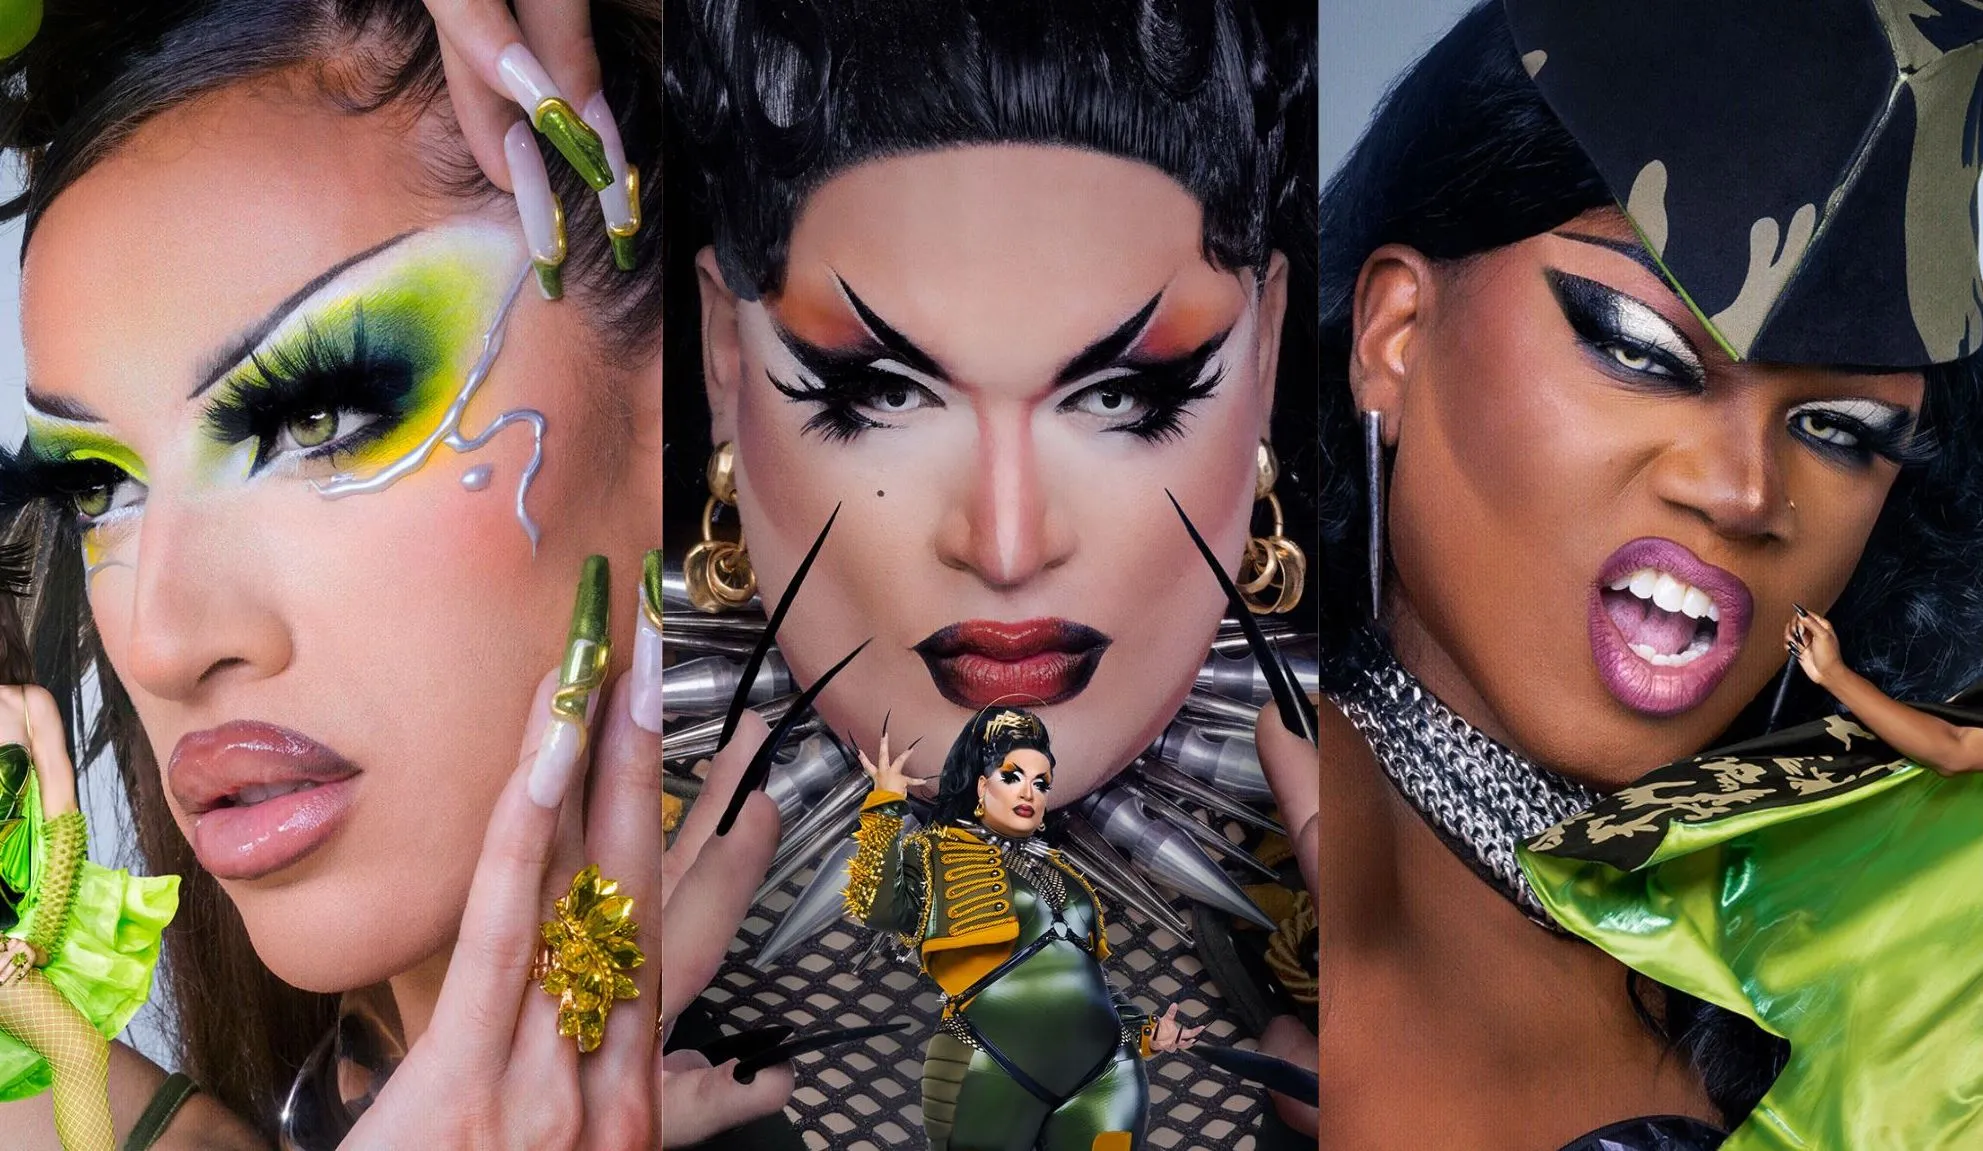 10 Trans Queens That Made History On 'RuPaul's Drag Race' in the US